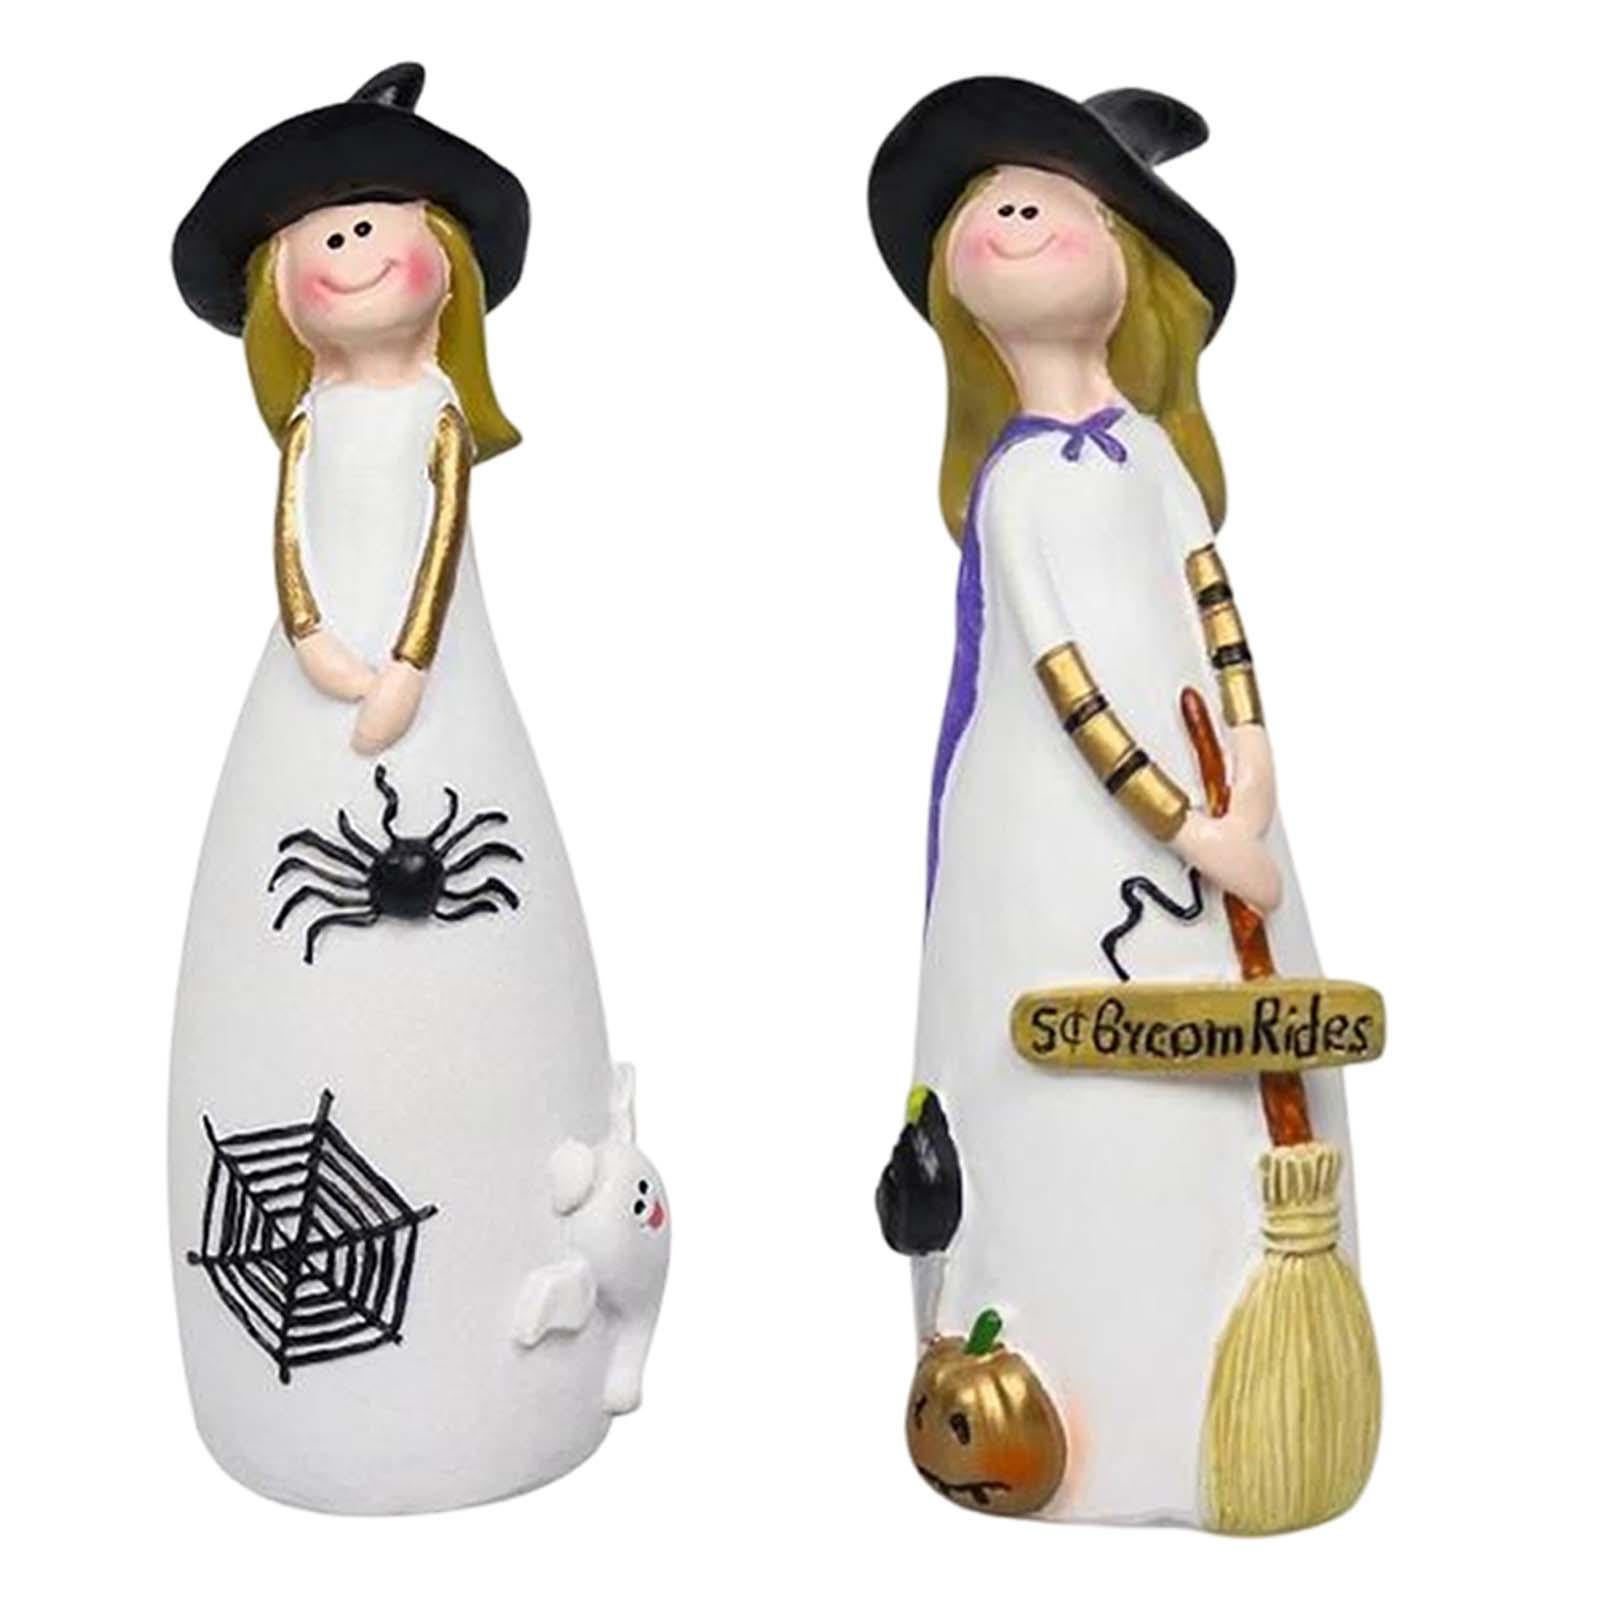 2x Halloween Witch Figurine Adorable Witch Statue for Holiday Party Decor